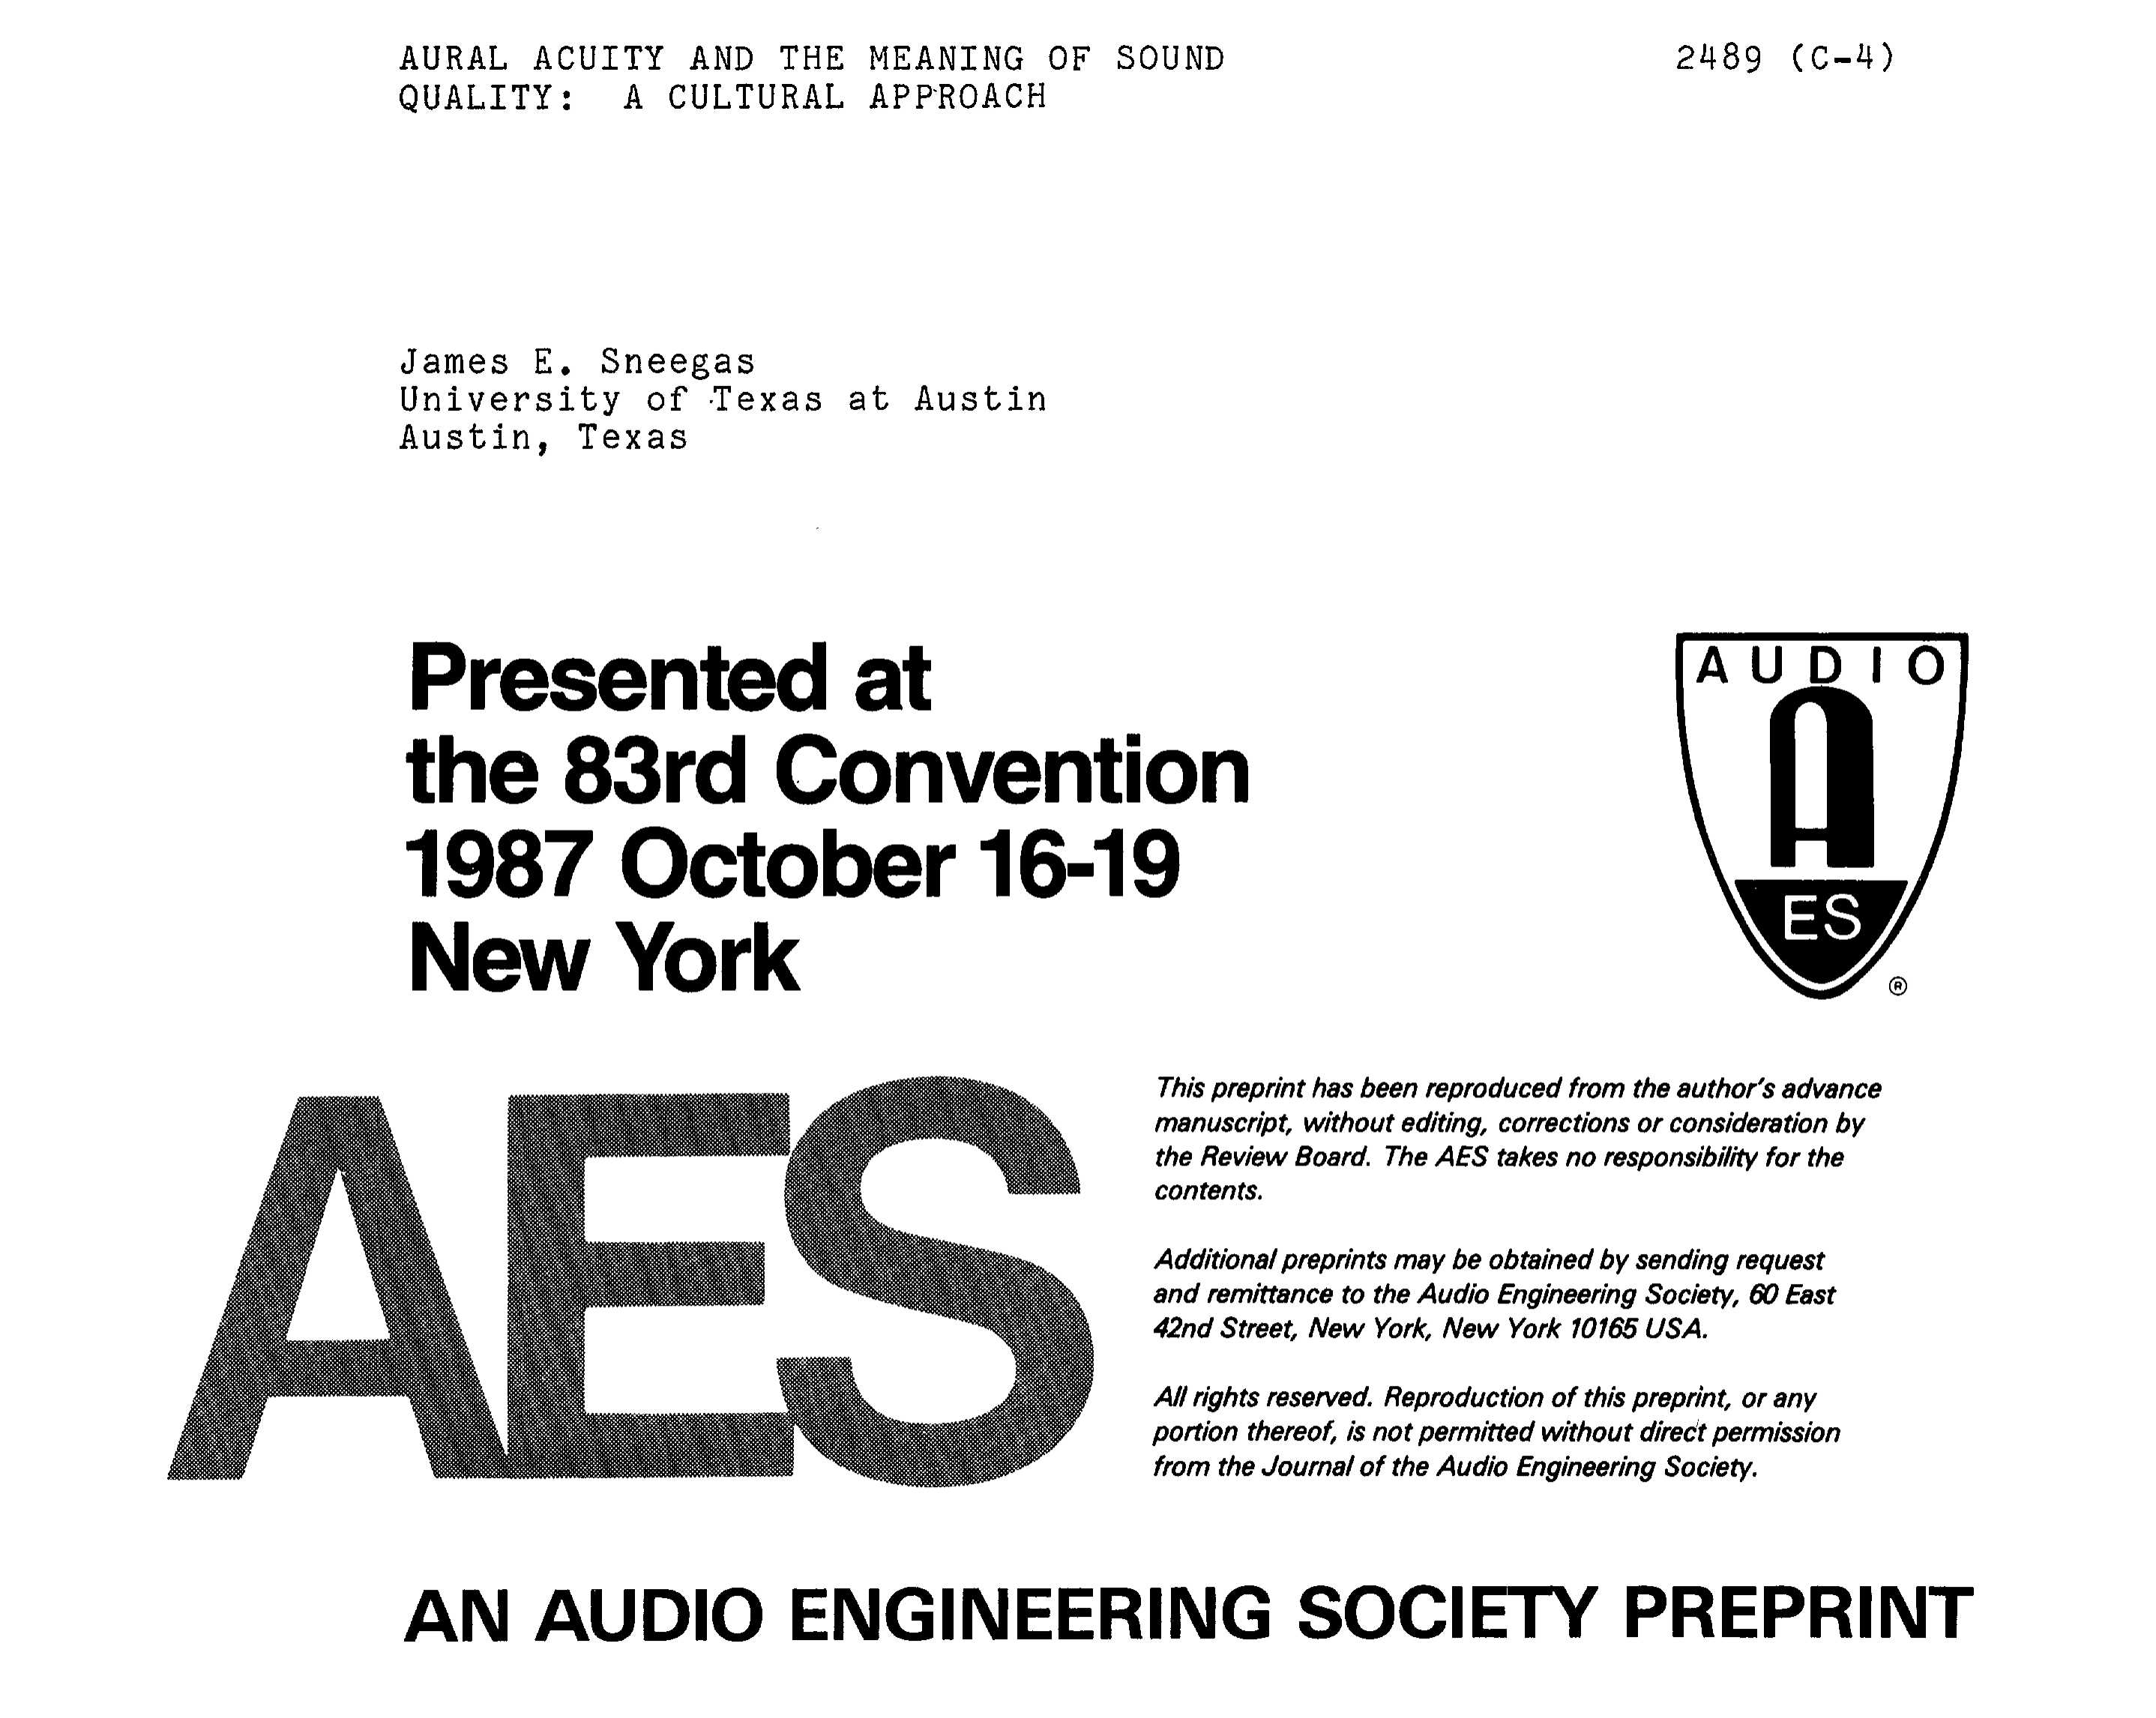 aes-e-library-aural-acuity-and-the-meaning-of-sound-quality-a